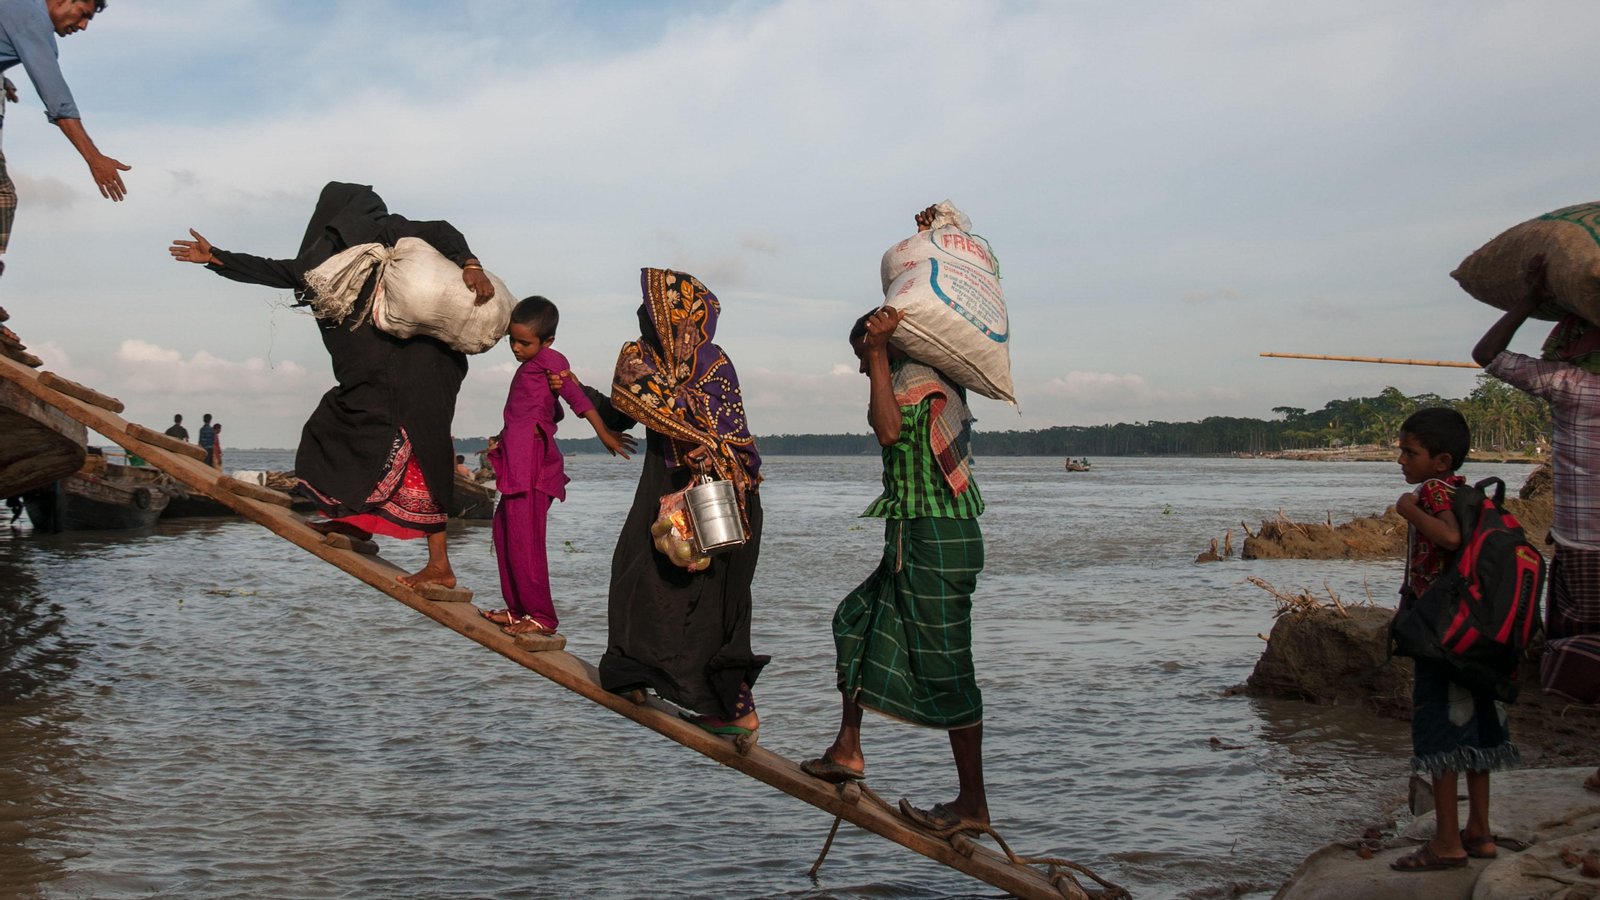 Residents of Bhola district moving towards shelter during a storm in 2014. Nearly 15 million Bangladeshis were displaced due to disasters in the last decade. (Image: Mohammad Ponir Hossain / Alamy via Dialogue Earth)